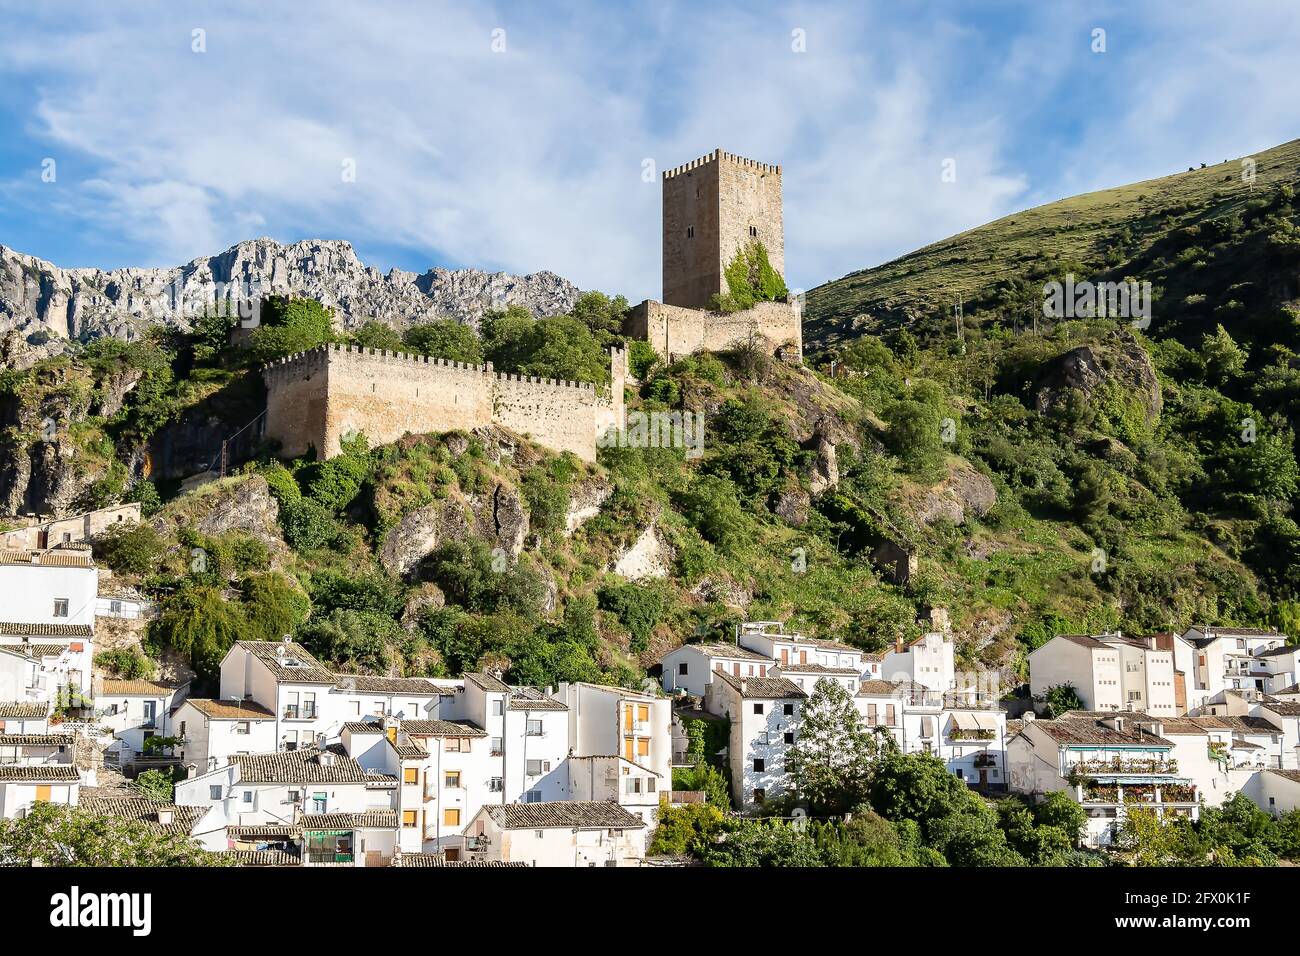 The castle of La Yedra, old enclave of defensive origin located in the Spanish municipality of Cazorla. Located in the lower part of the Salvatierra h Stock Photo